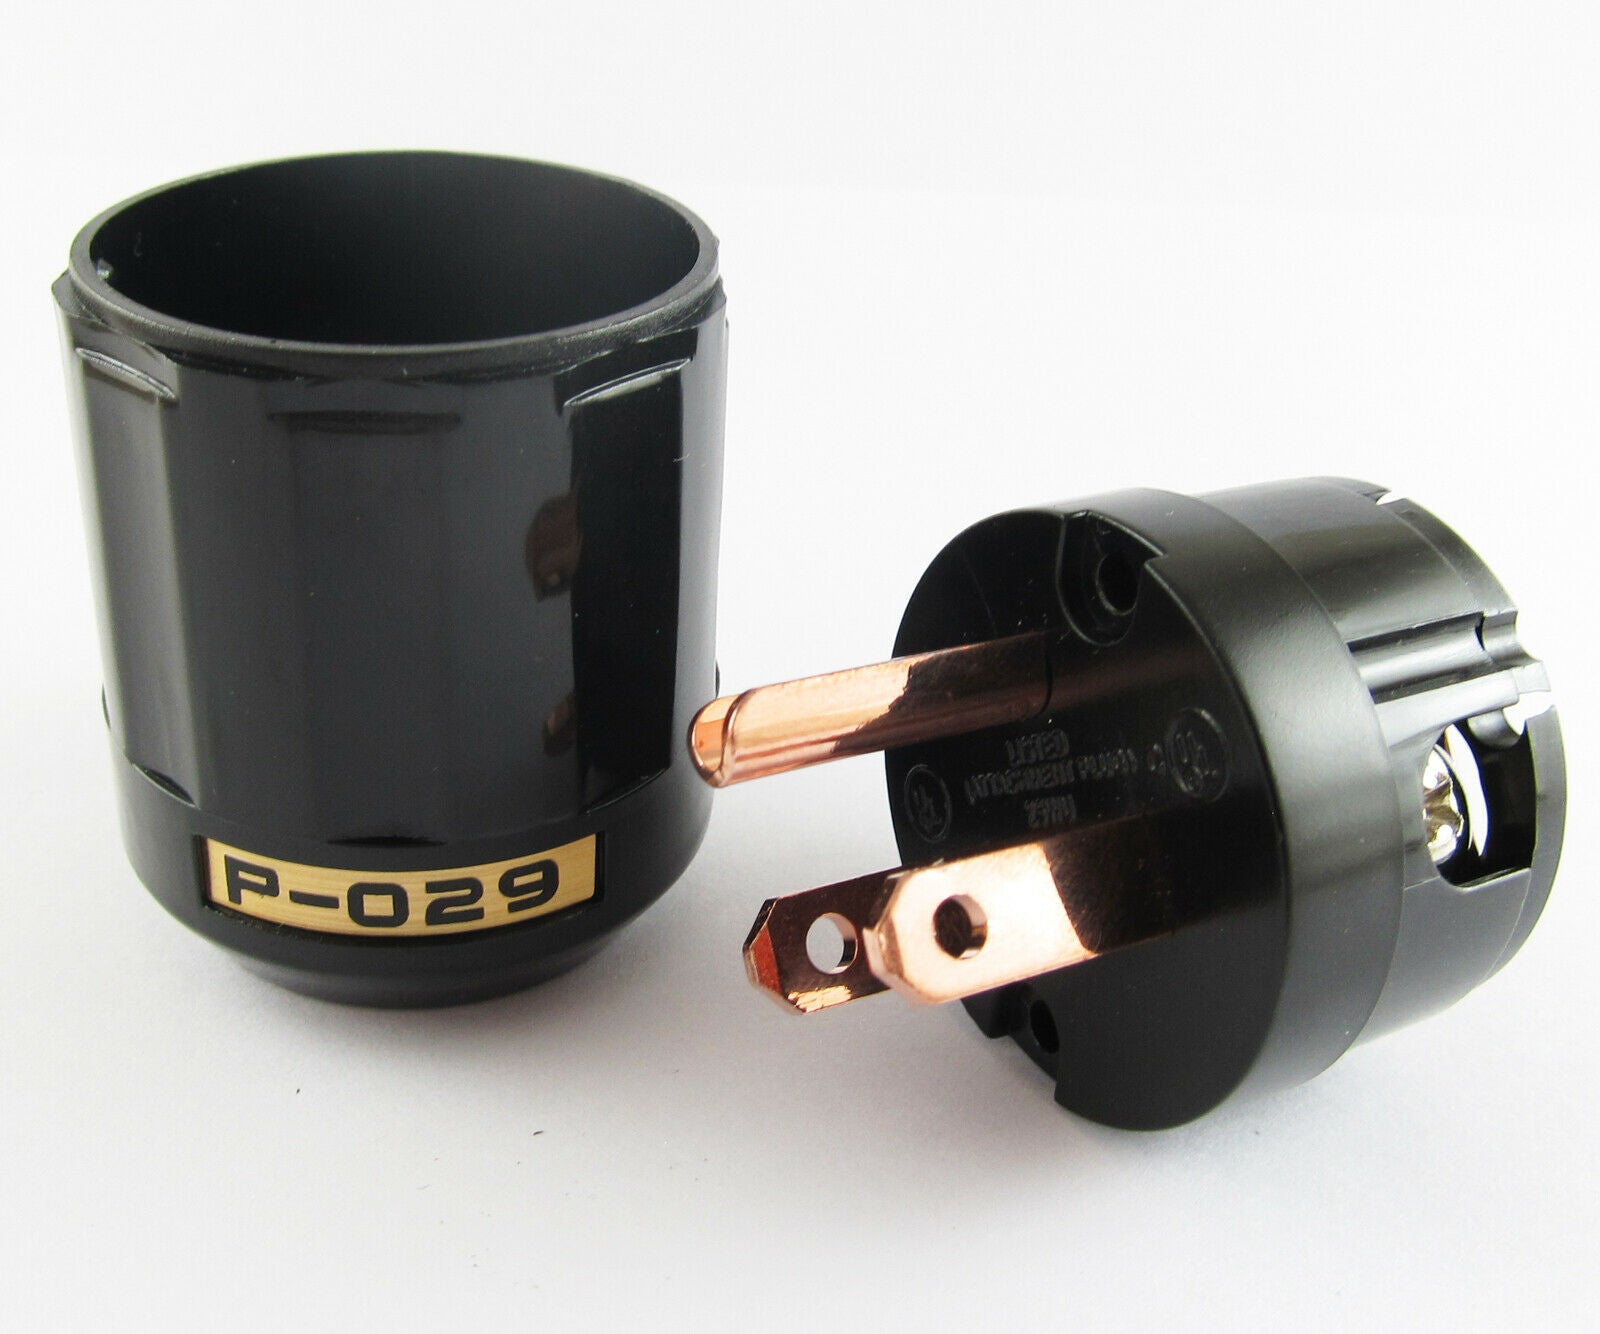 1pc High Quality Pure Copper P-029 US Power Plug IEC Connector for Audio Black